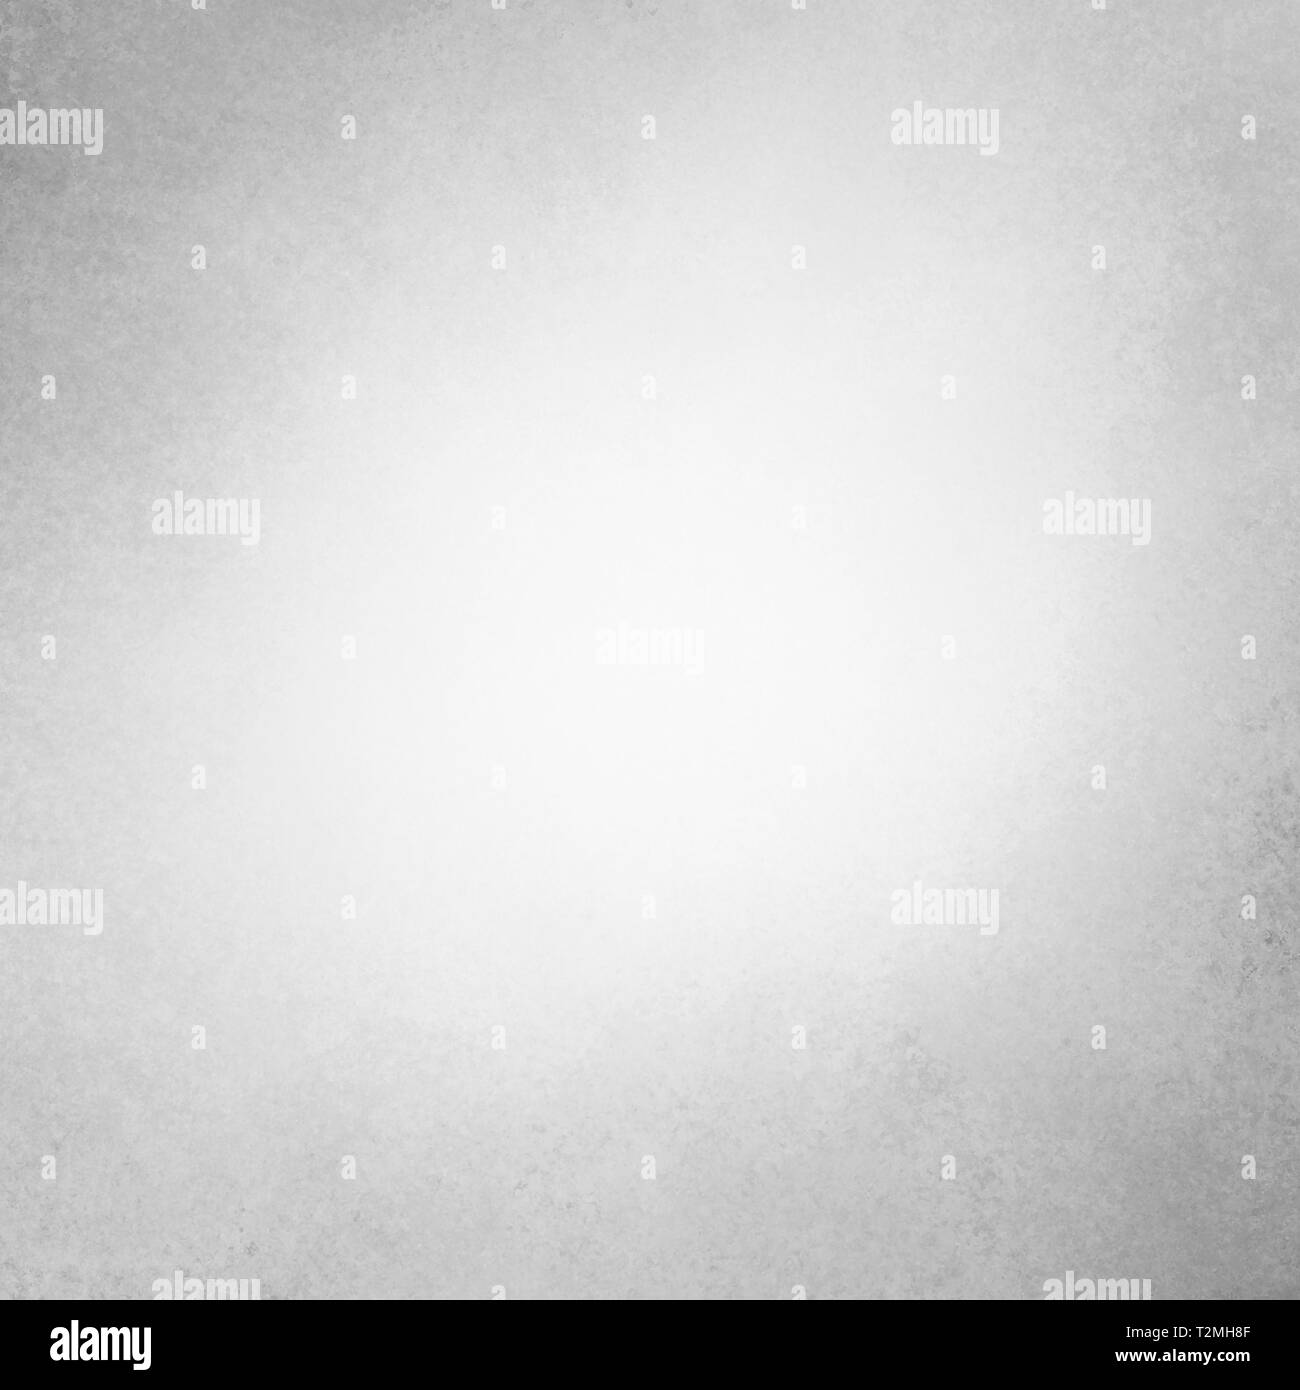 old gray and white background with vintage distressed texture and dark grunge border with soft light center, monochrome black and white background des Stock Photo